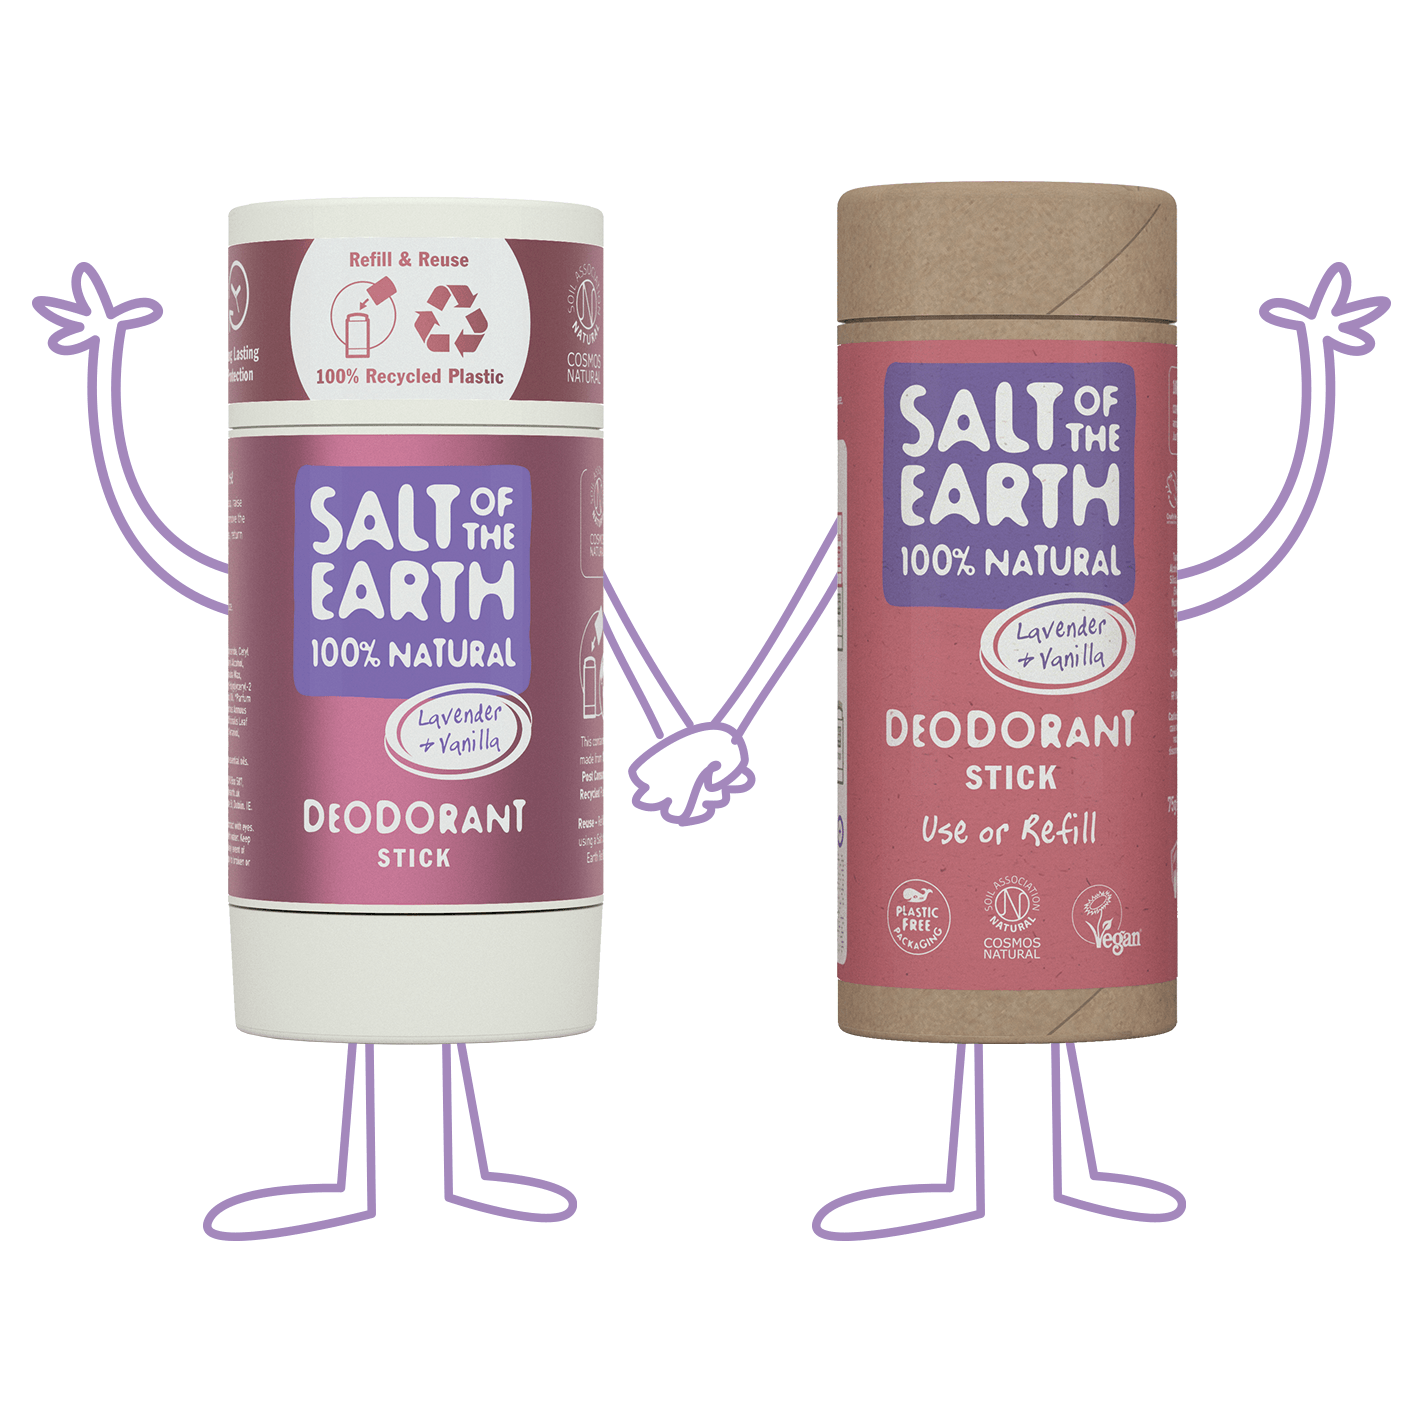 Stick it to Body Odour with the New Members of our Family! - Salt of the Earth Natural Deodorants